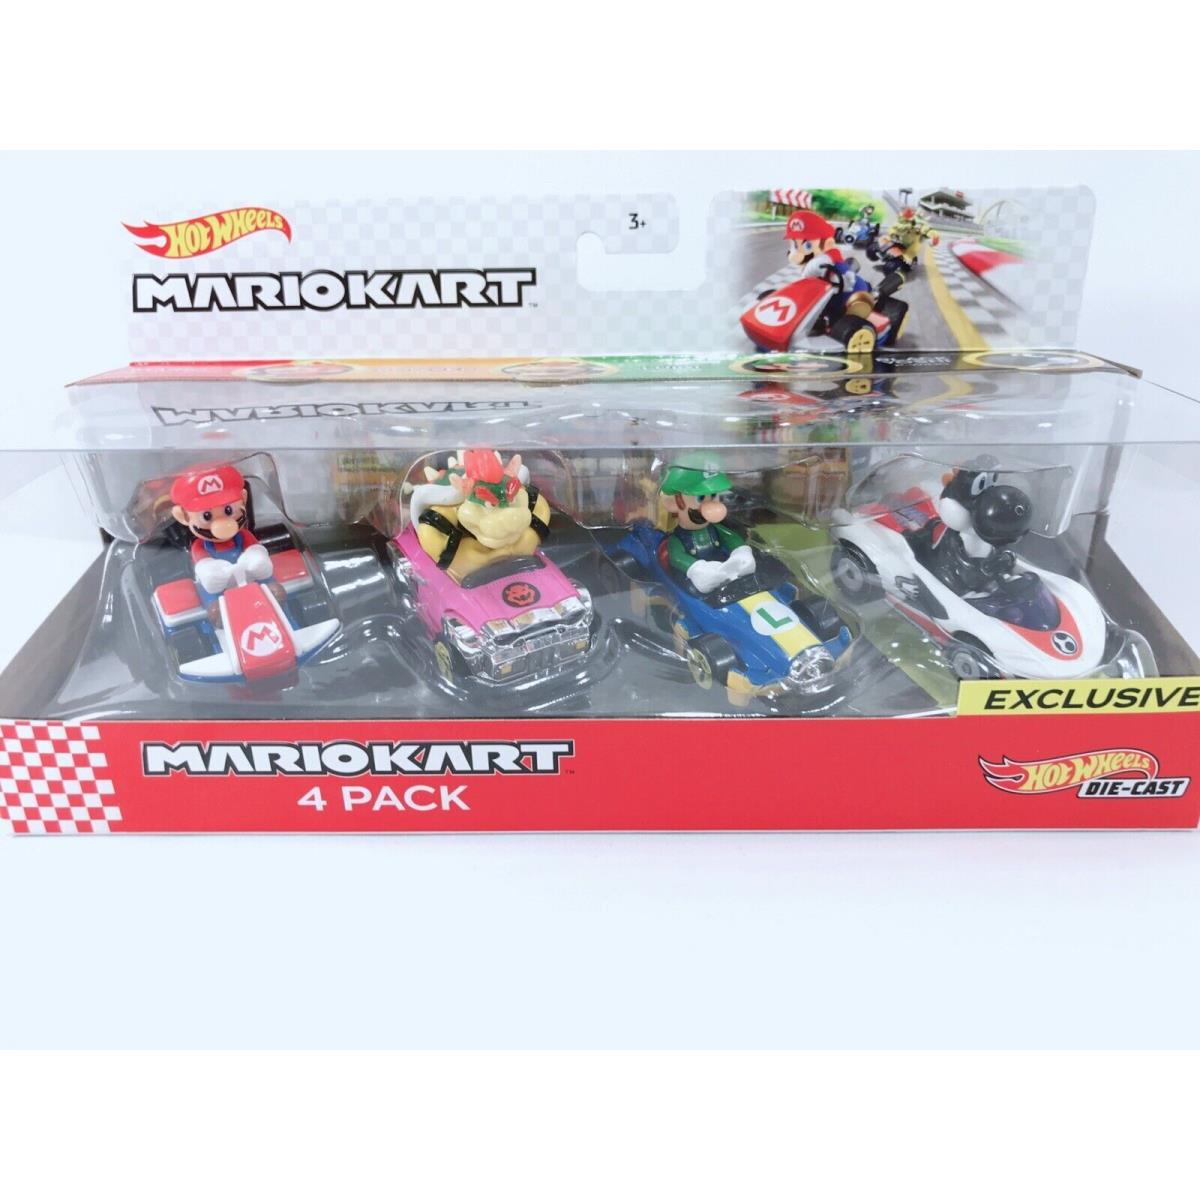 Hot Wheels Mariokart Diecast 4 Pack with Exclusive Black Yoshi P-wing